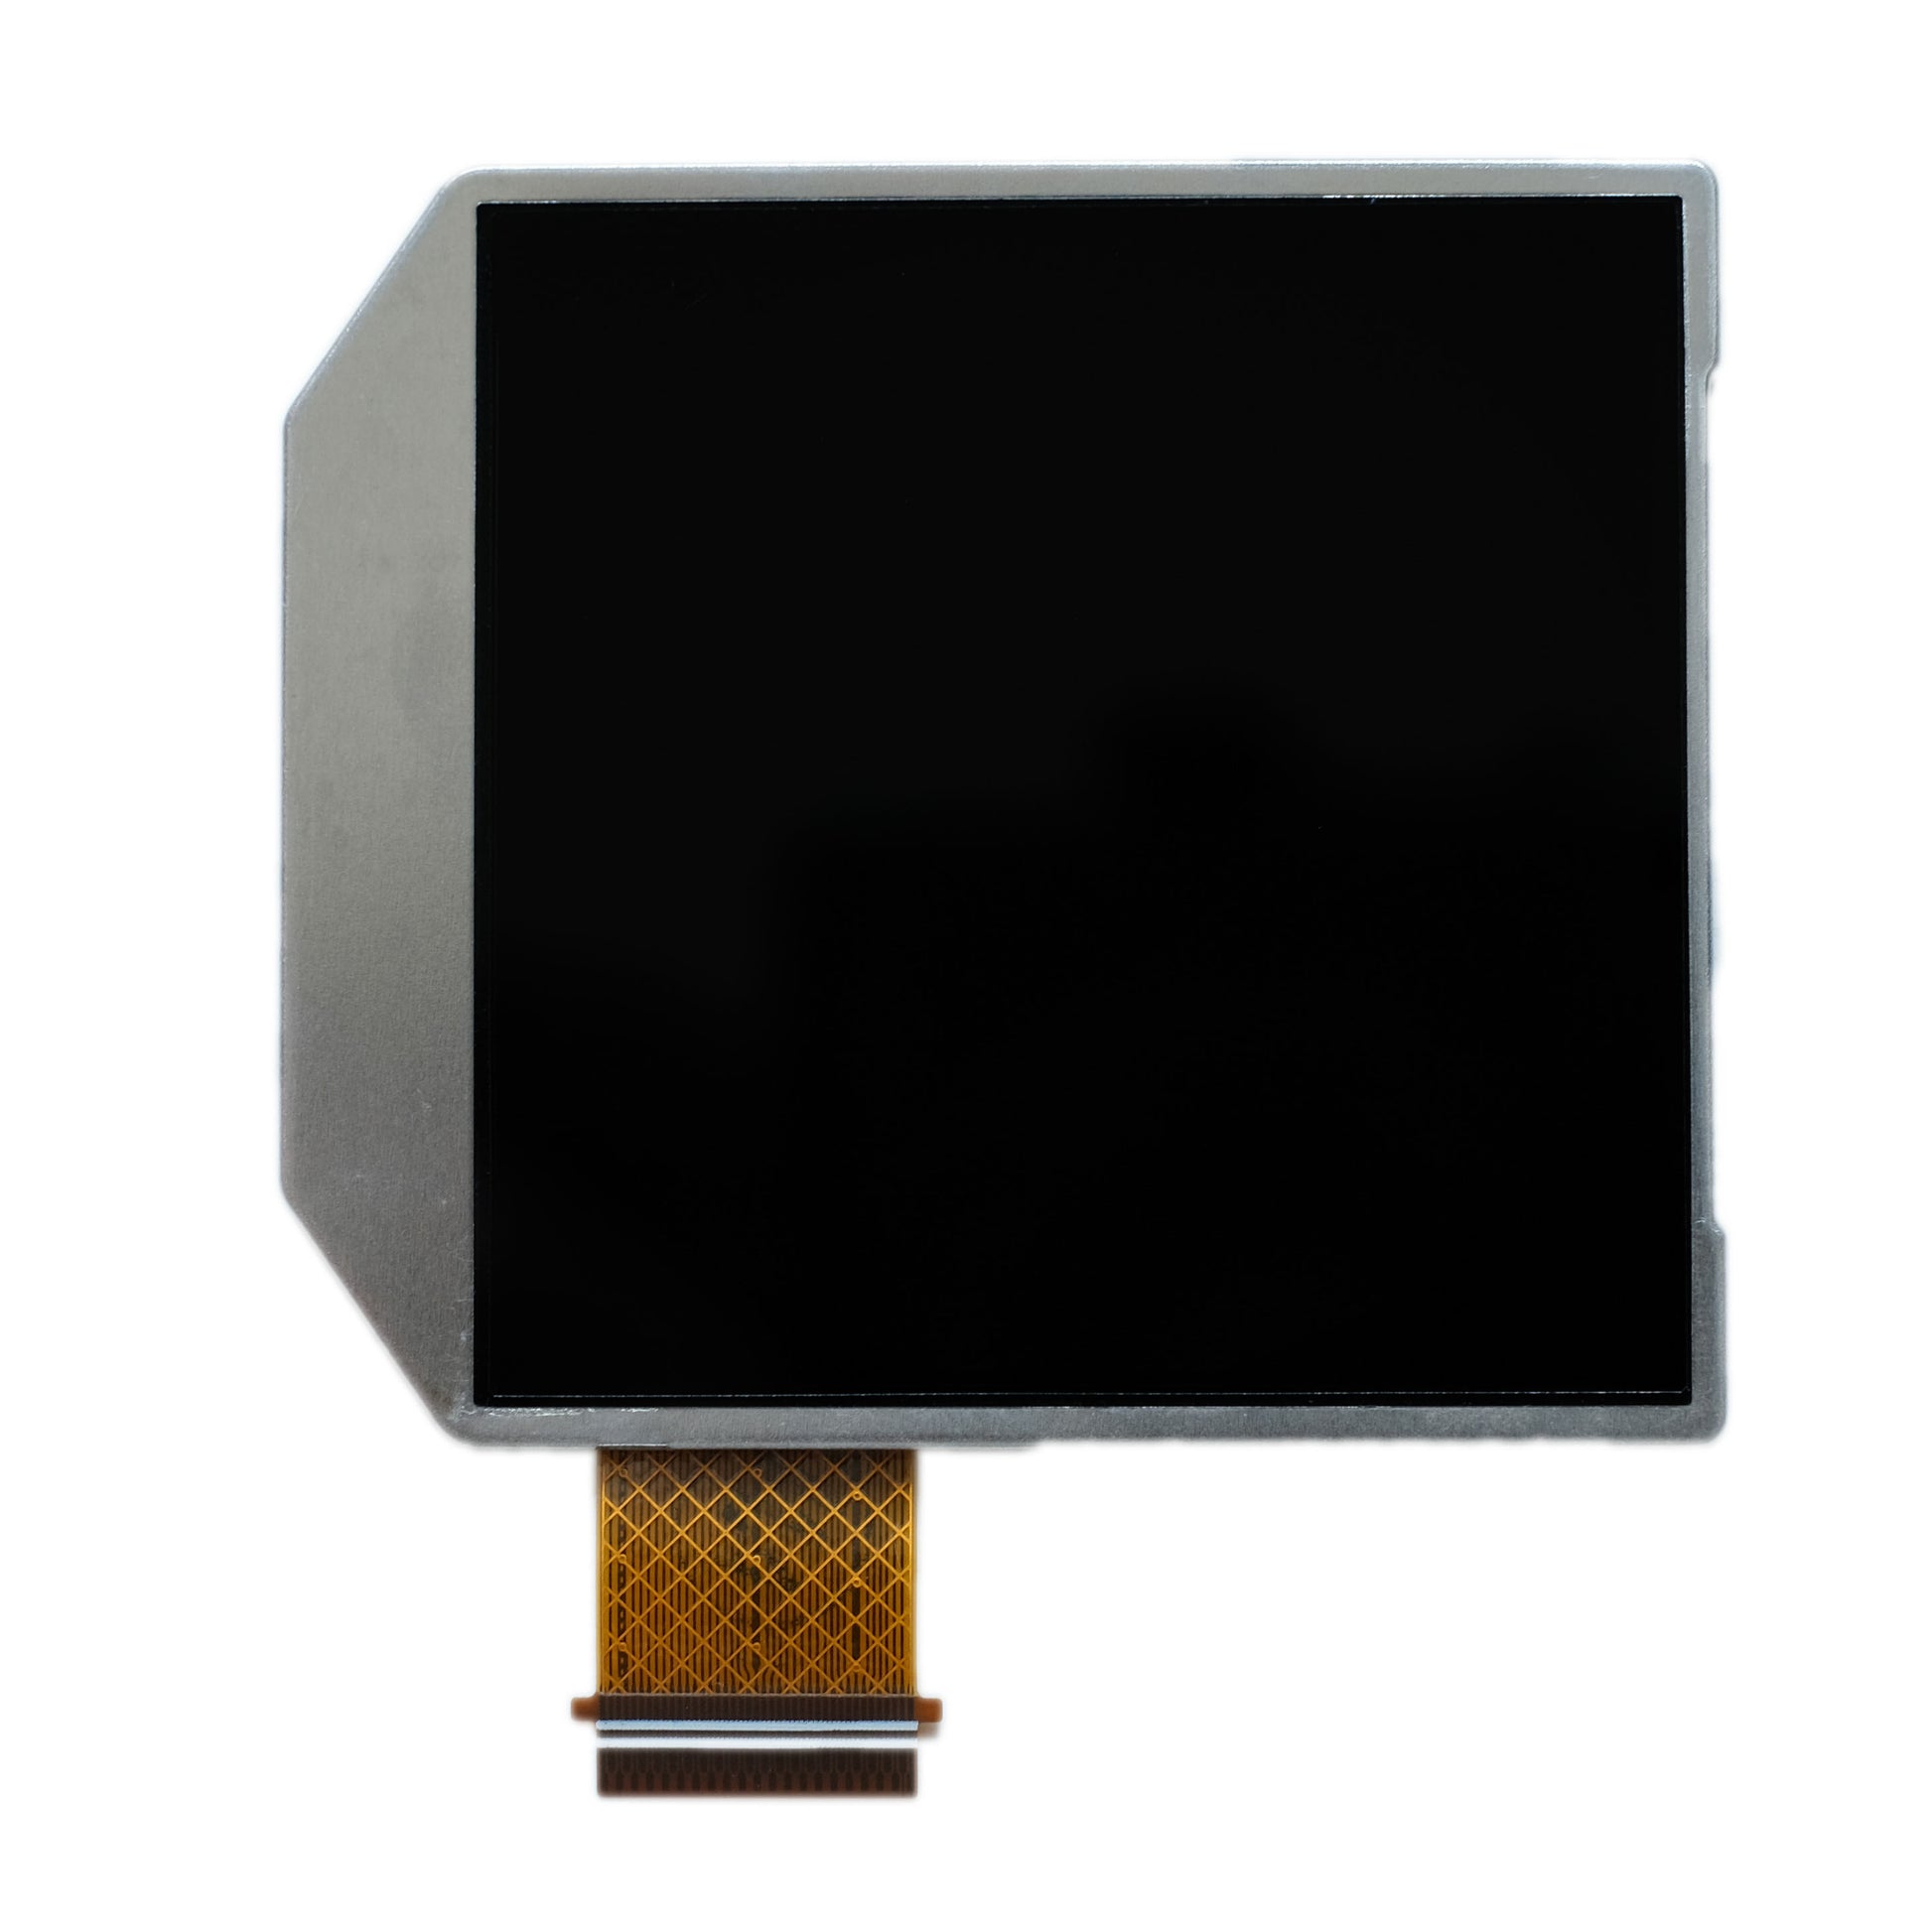 2.48 inch Round TFT Display Panel with 320x320 resolution, optimal viewing at 12 o’clock, utilizing RGB and SPI interfaces